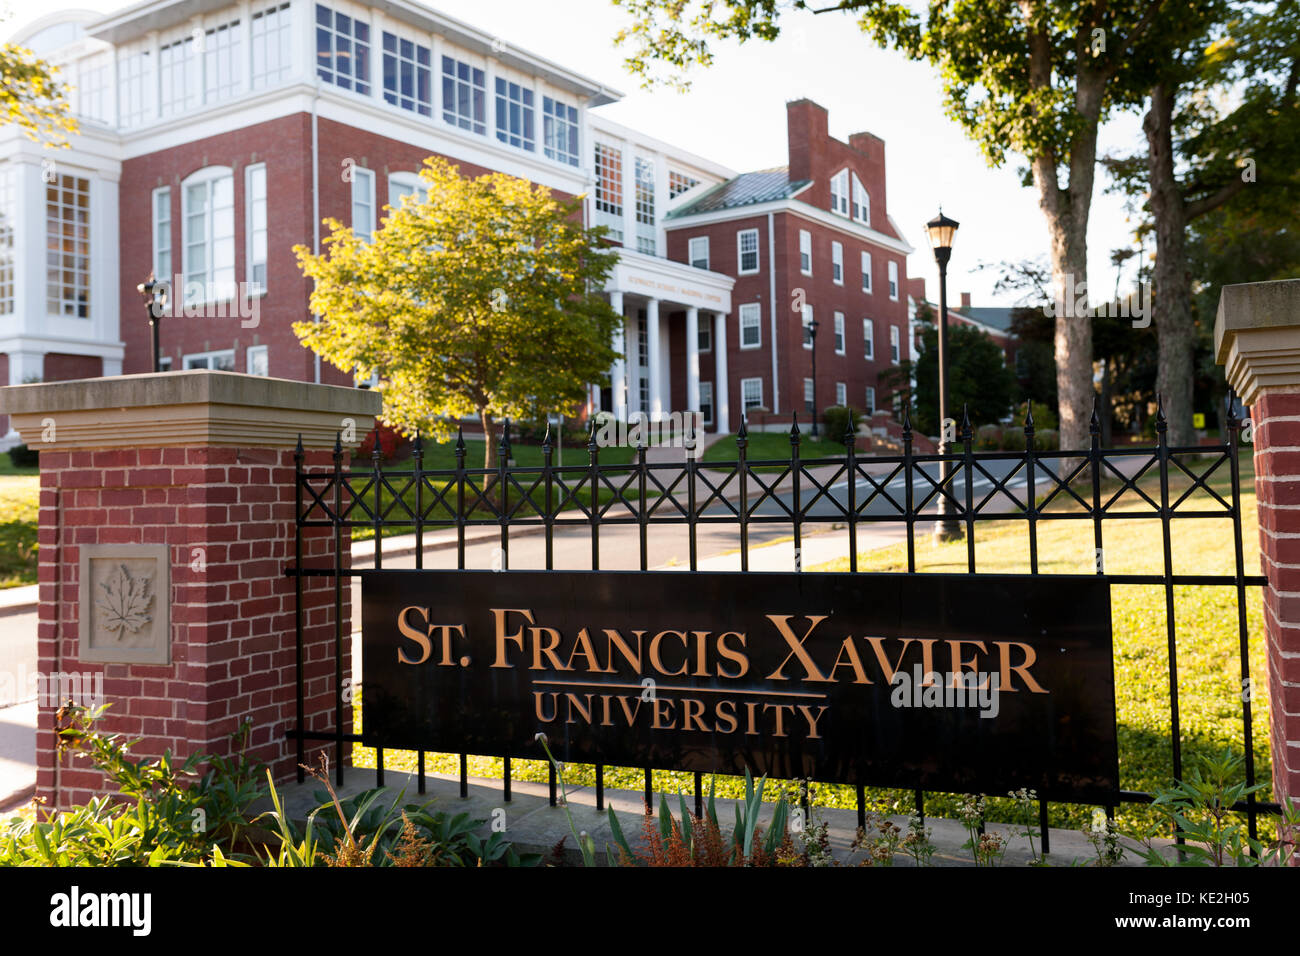 The campus of St. Francis Xavier University in Antigonish, N.S. on August 28, 2017. Stock Photo